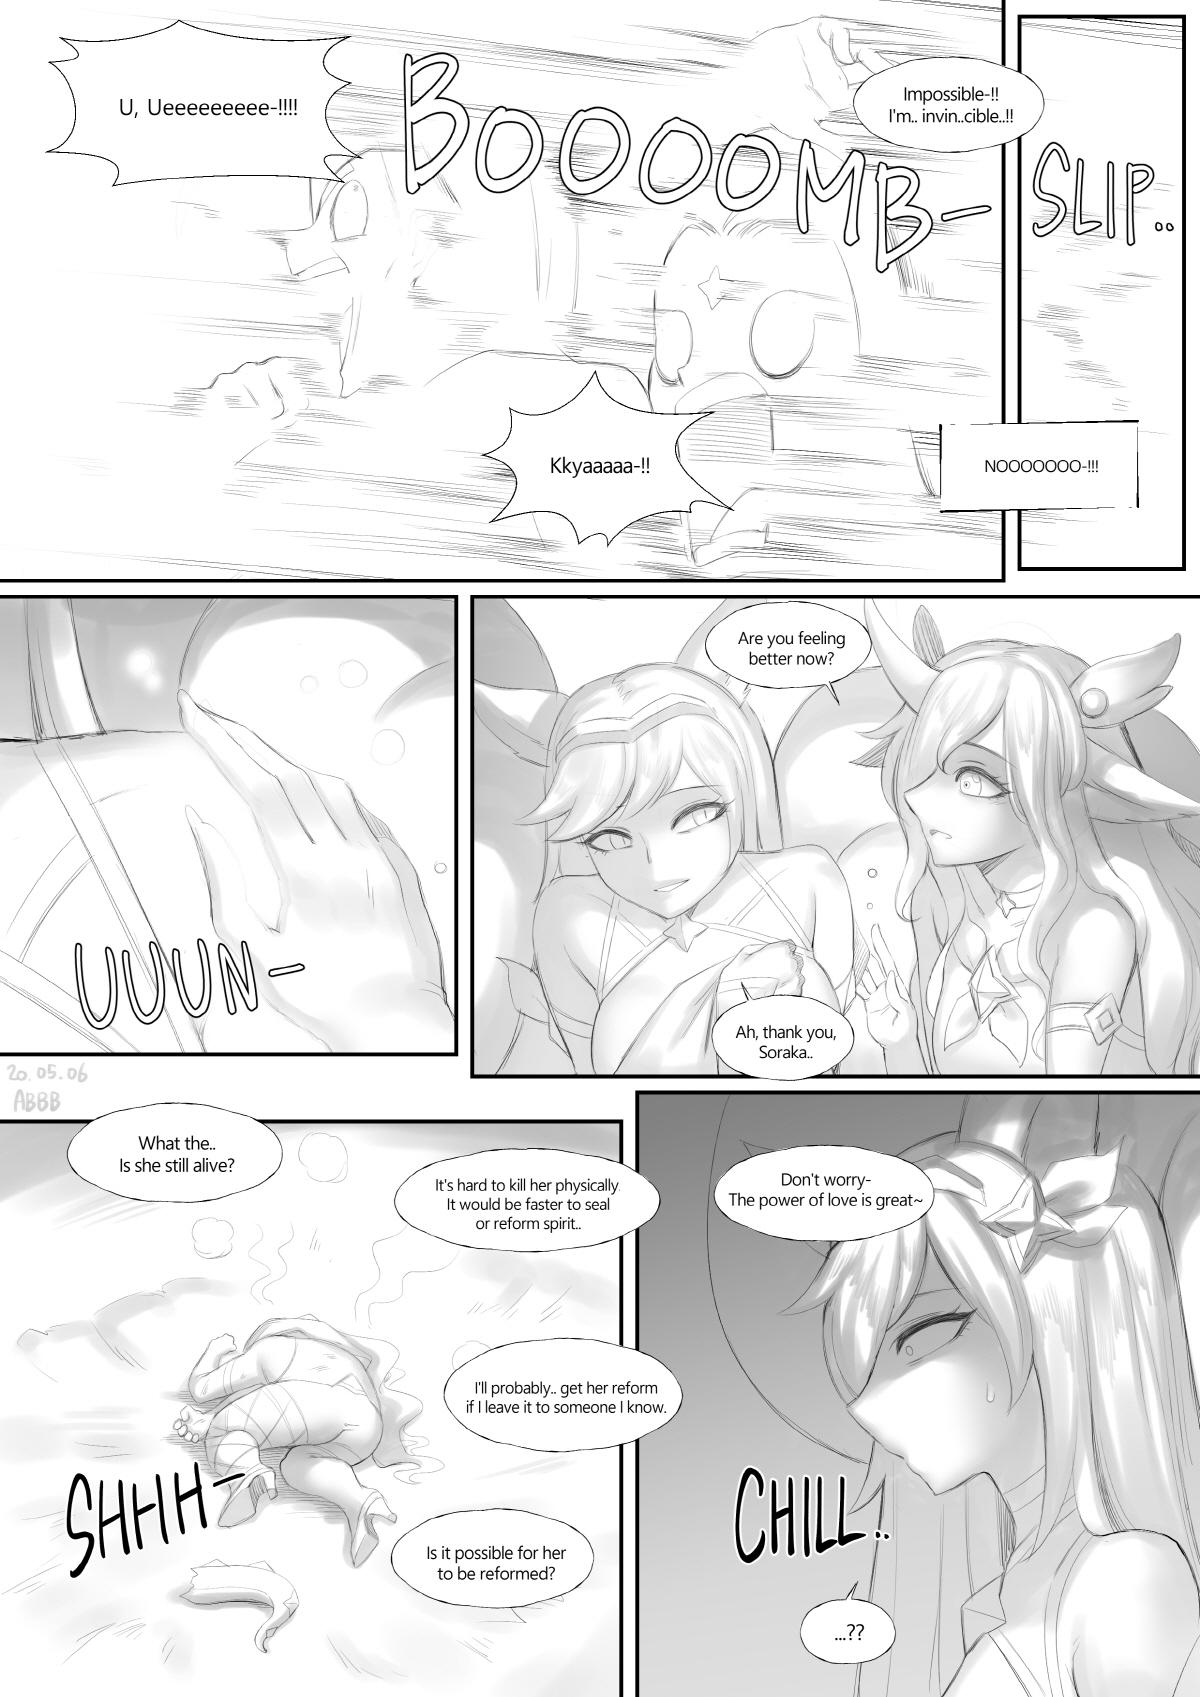 Hugecock Star Guardian | 별 수호자 - League of legends Screaming - Page 50